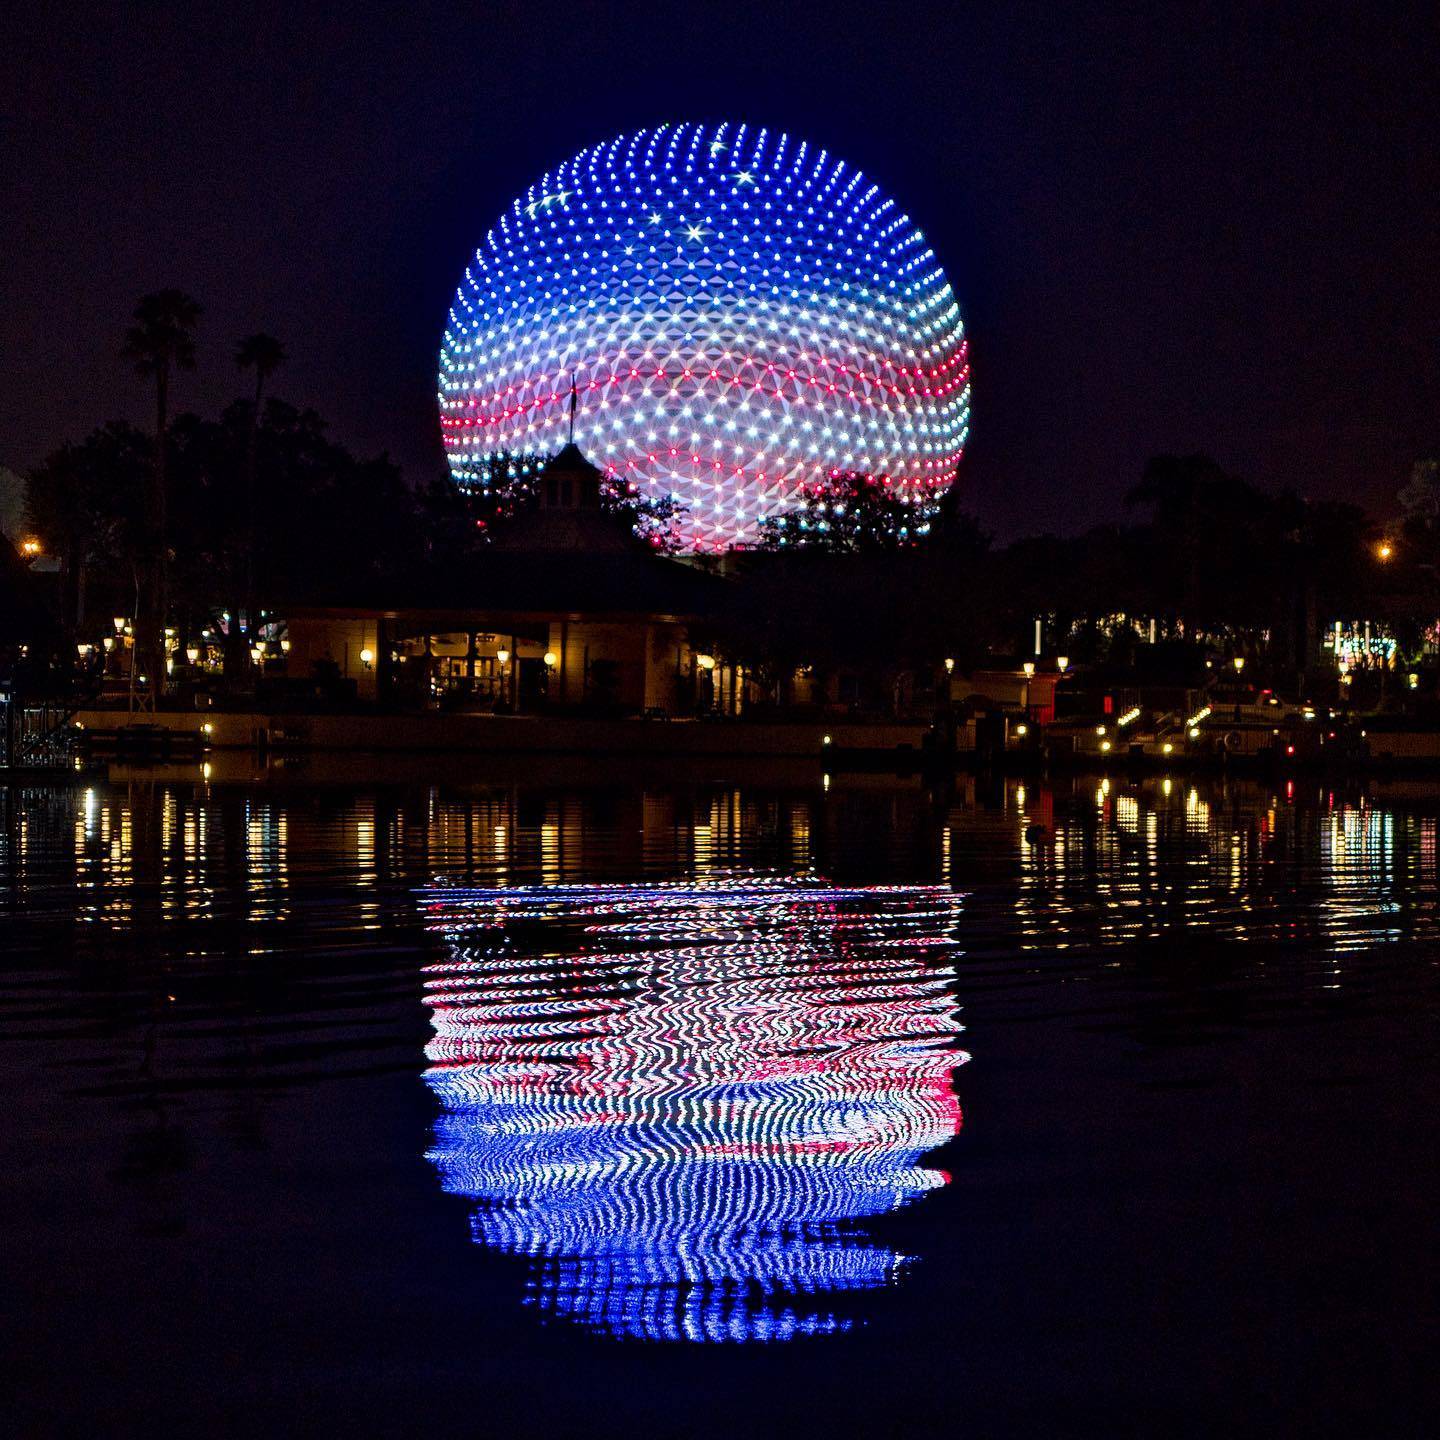 Spaceship Earth July 4 ambient lighting design